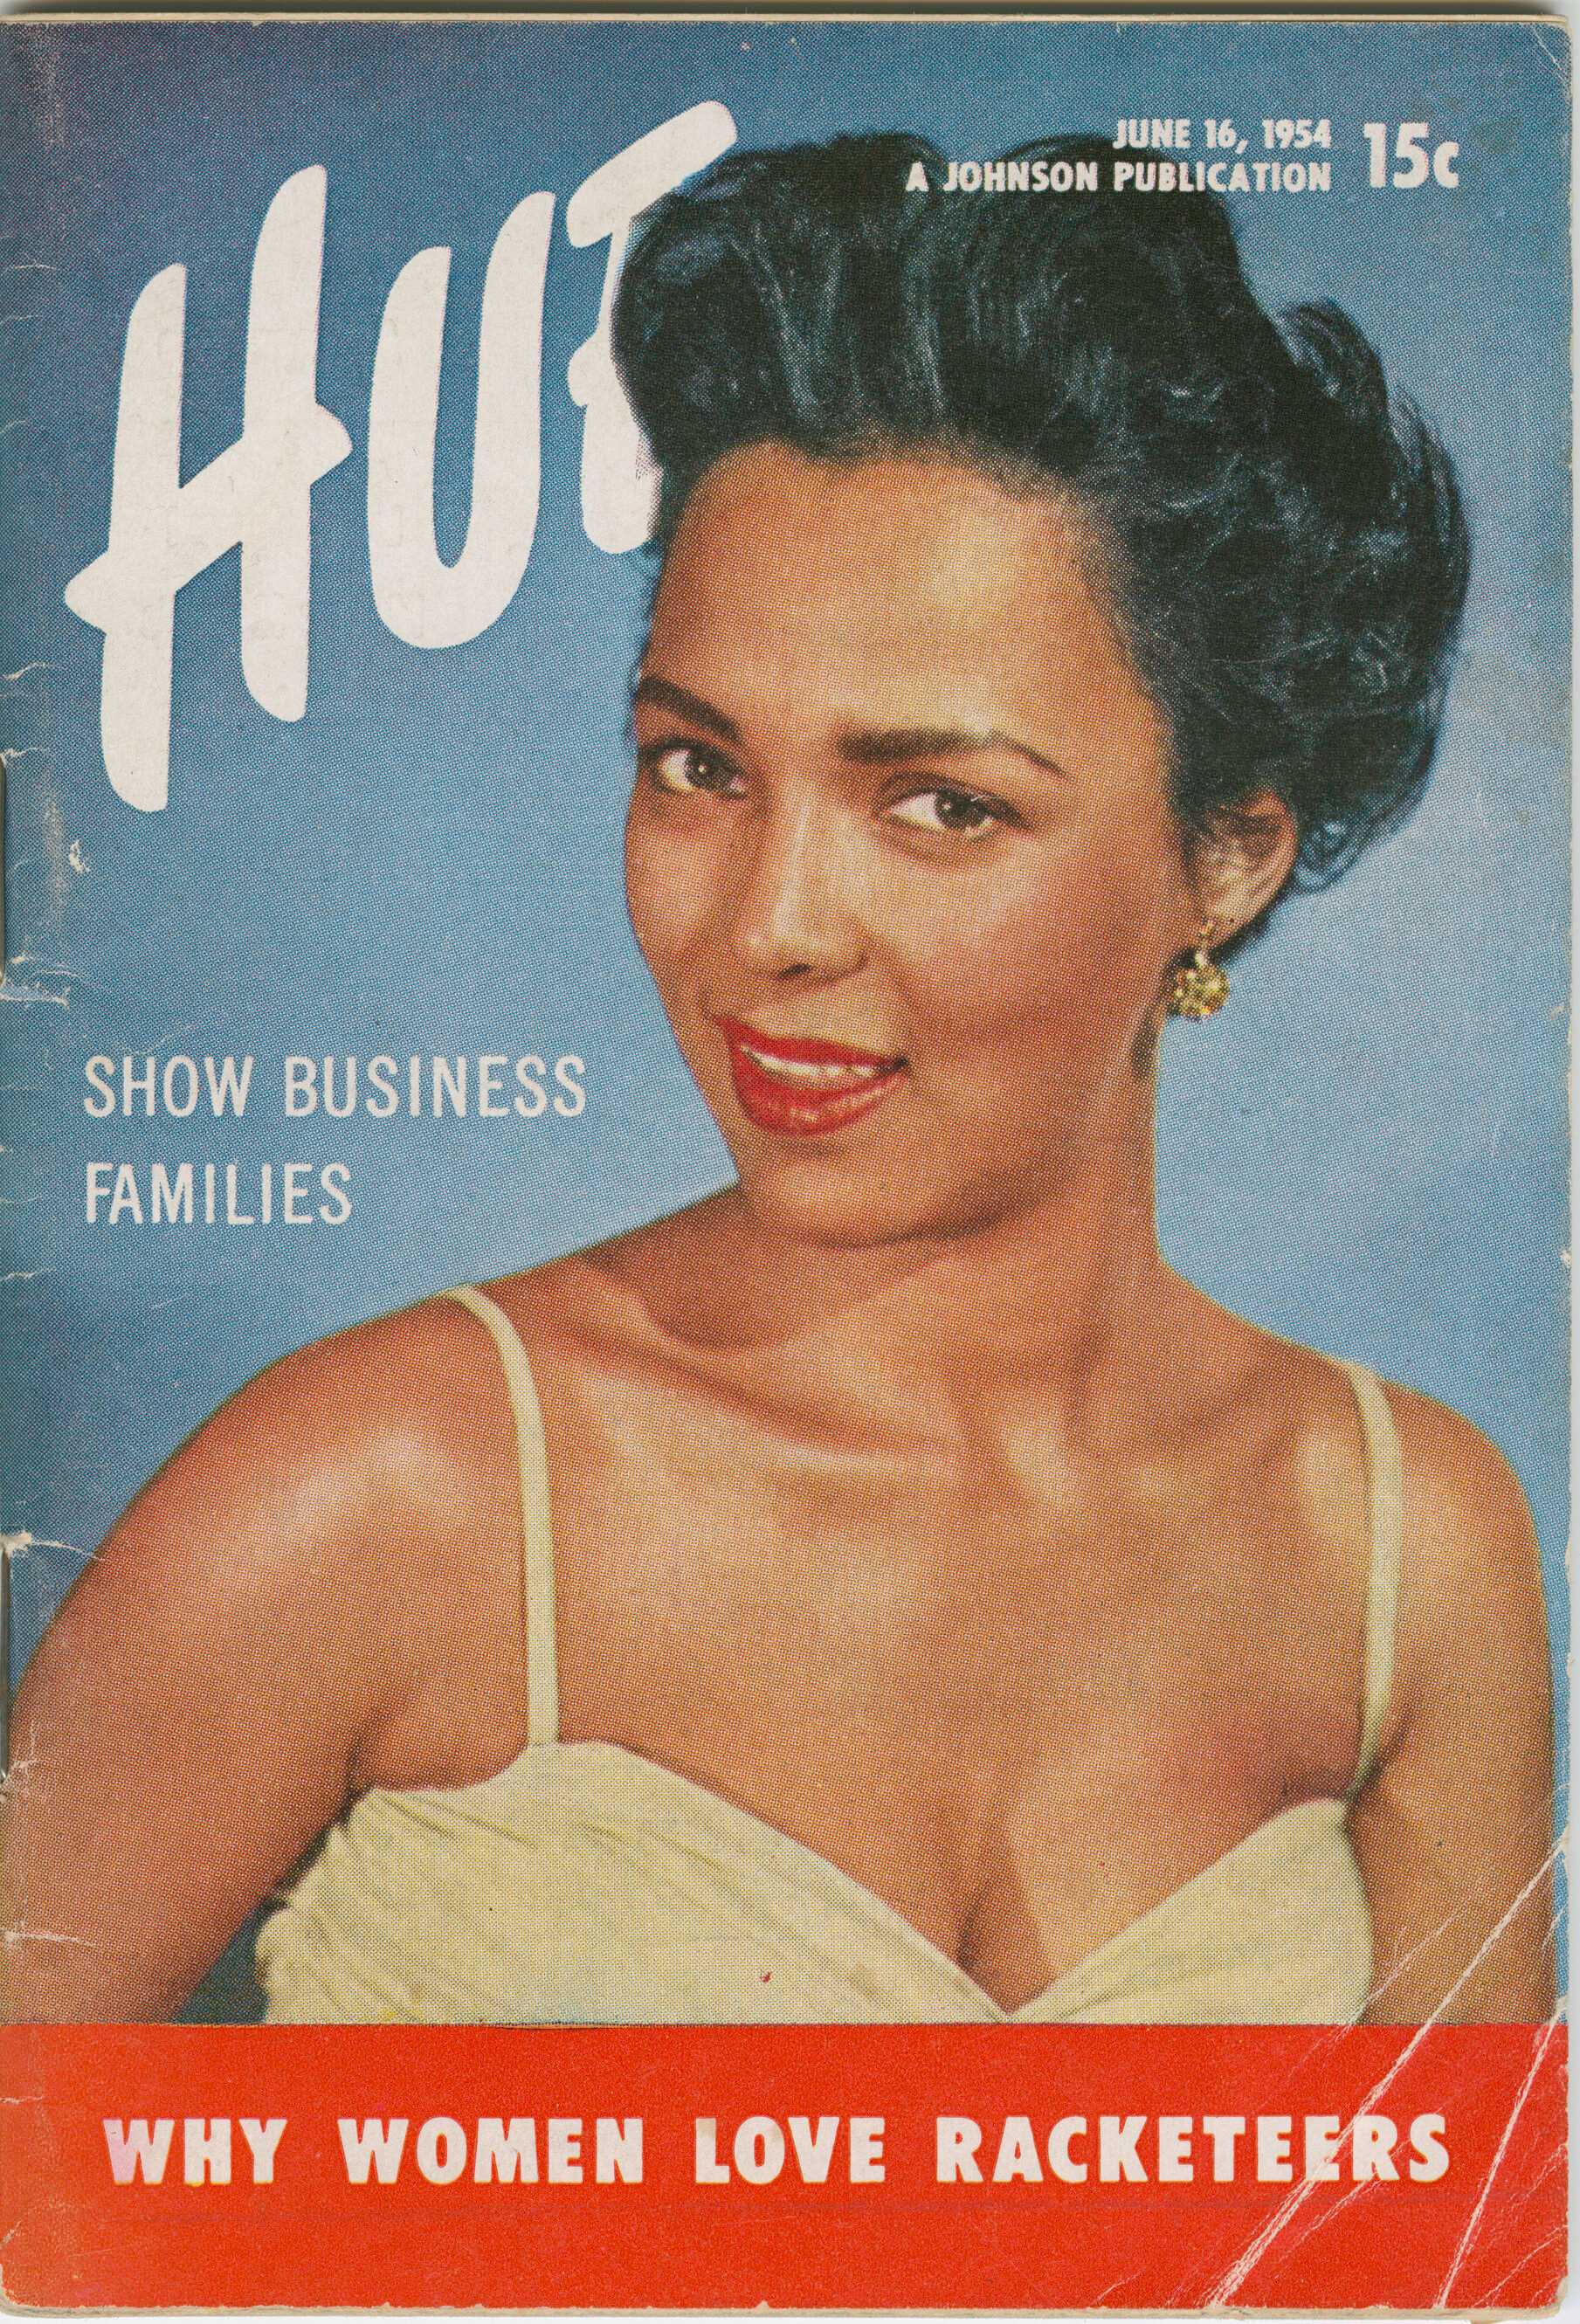 The June 16, 1954 issue of Hue magazine featuring Dorothy Dandridge on the cover.